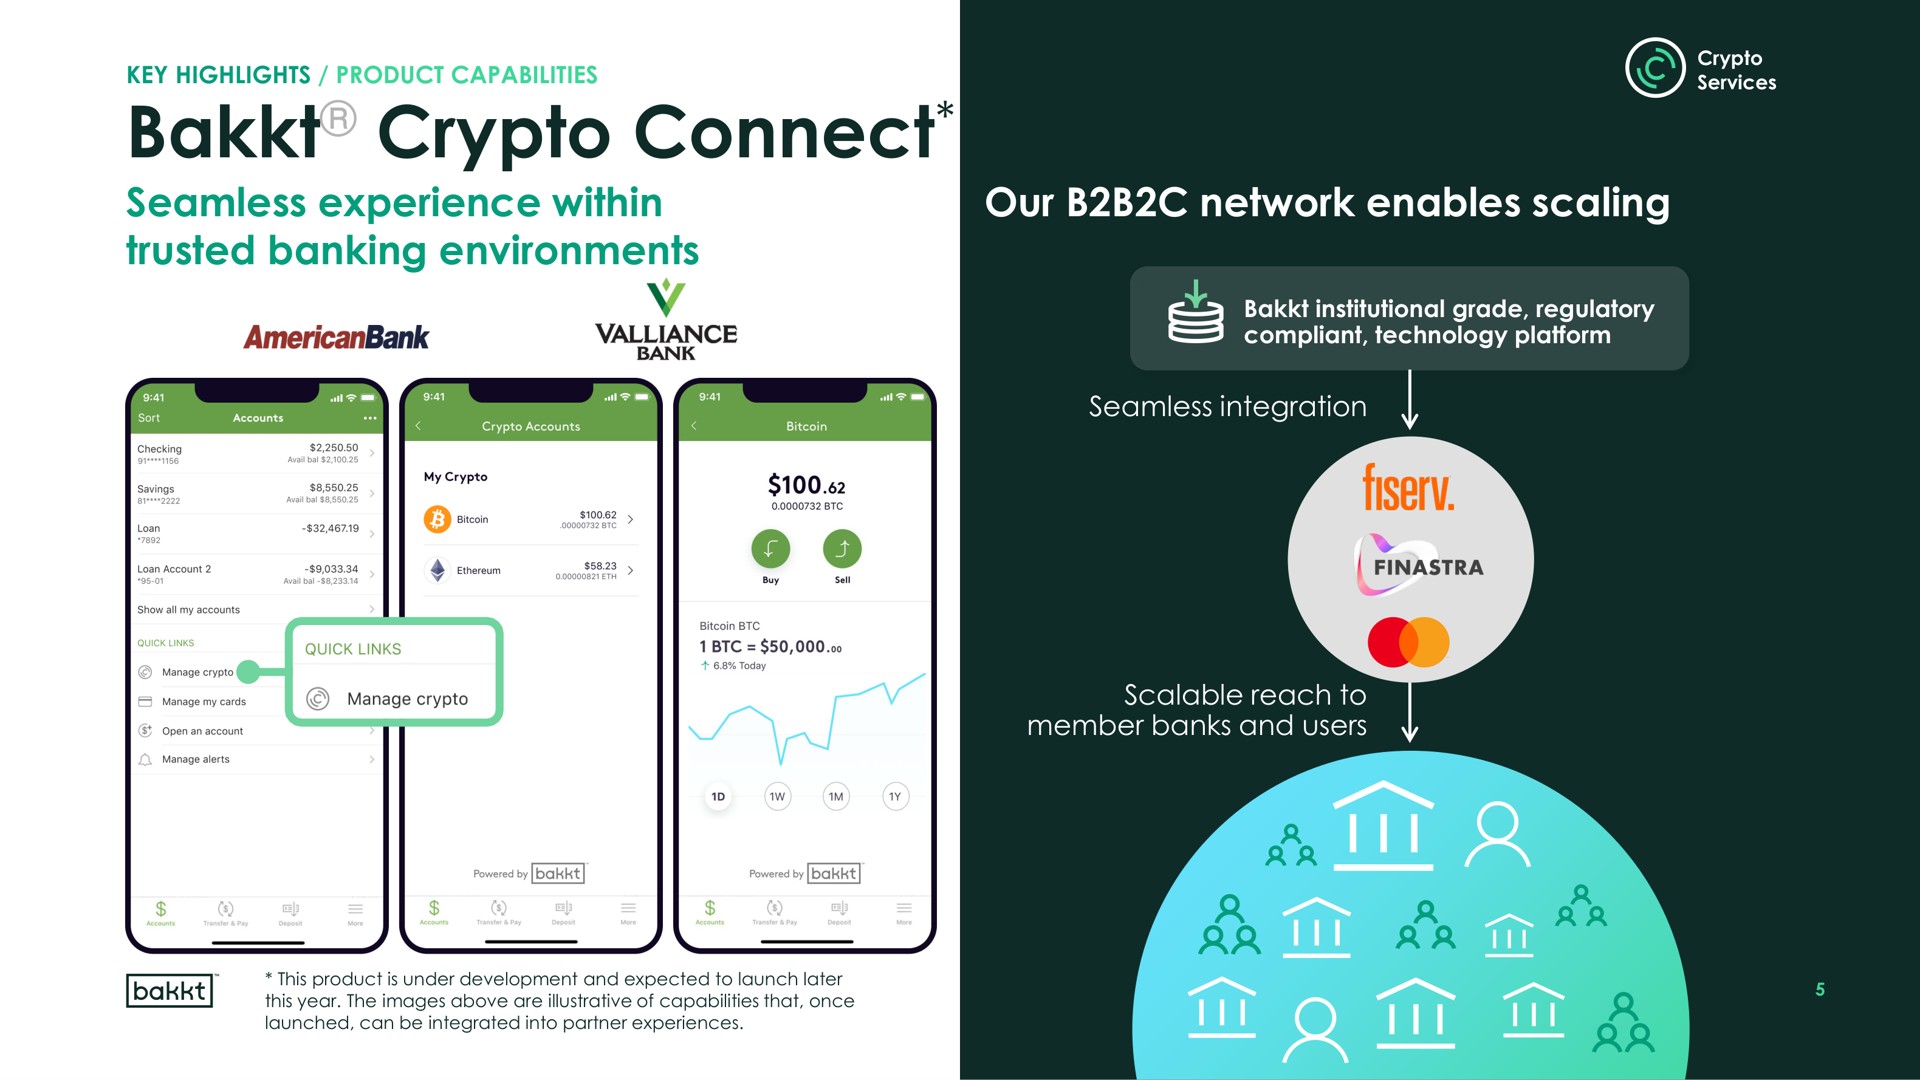 connect seamless experience within trusted banking environments our network enables scaling | Bakkt